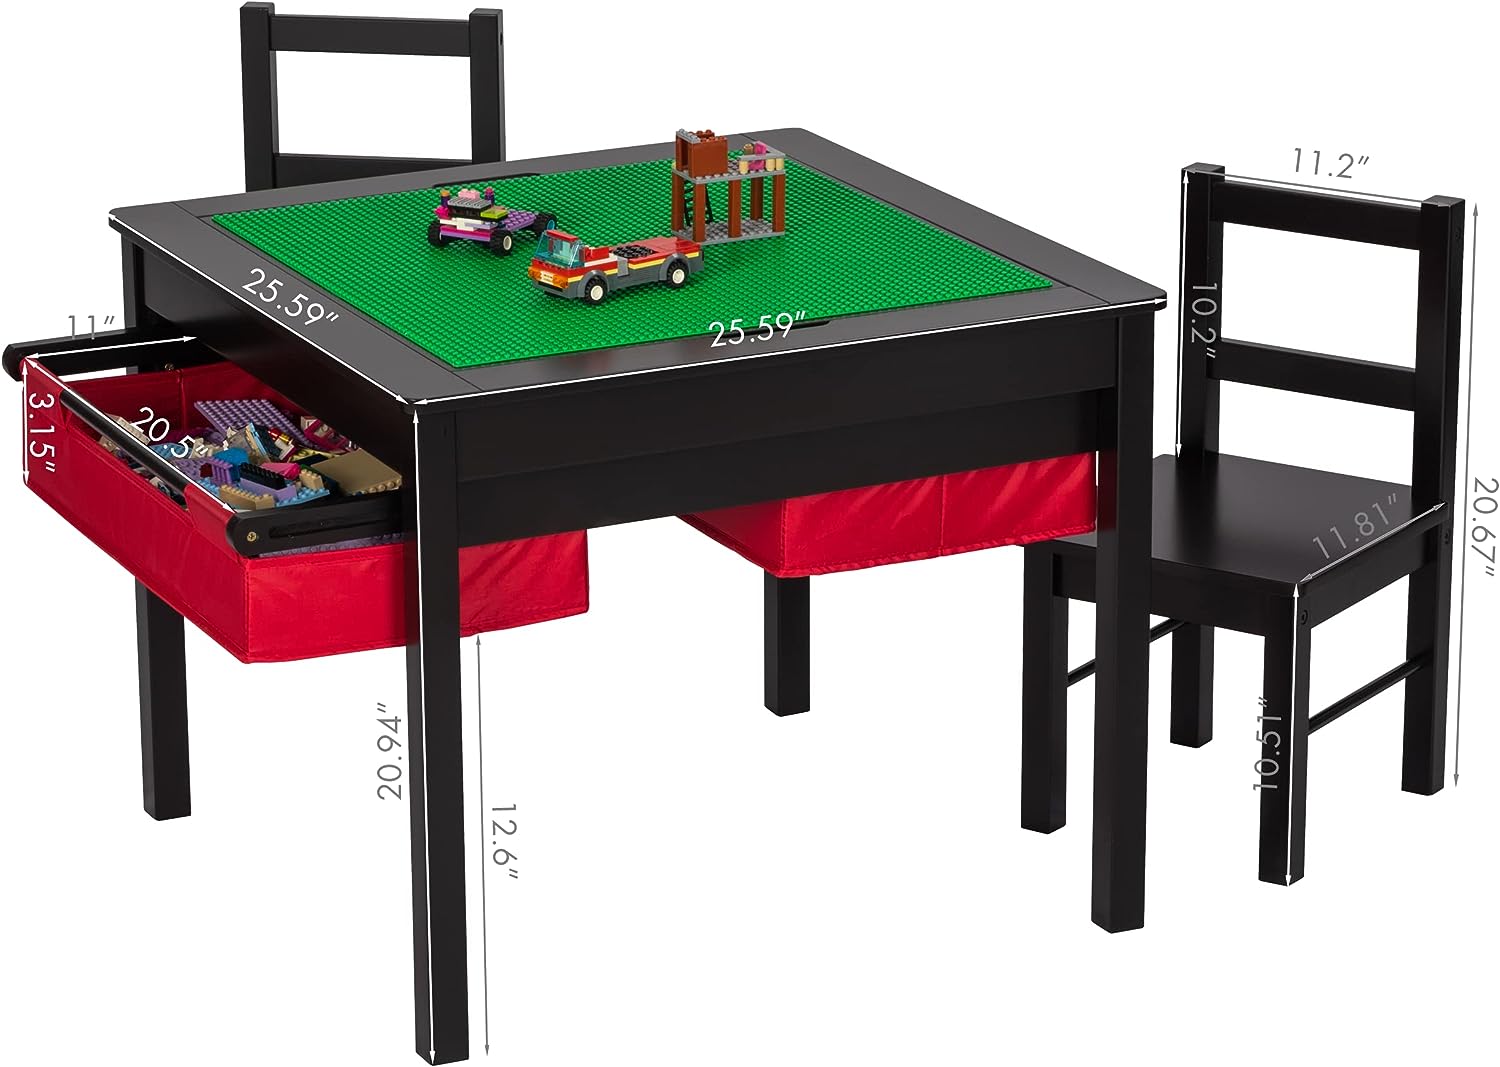 https://bigbigmart.com/wp-content/uploads/2023/09/UTEX-Wooden-2-in-1-Kids-Construction-Play-Table-and-2-Chairs-Set-with-Storage-Drawers-and-Built-in-Plate-Compatible-with-Lego-and-Duplo-BricksEspresso-with-Red-Drawers8.jpg